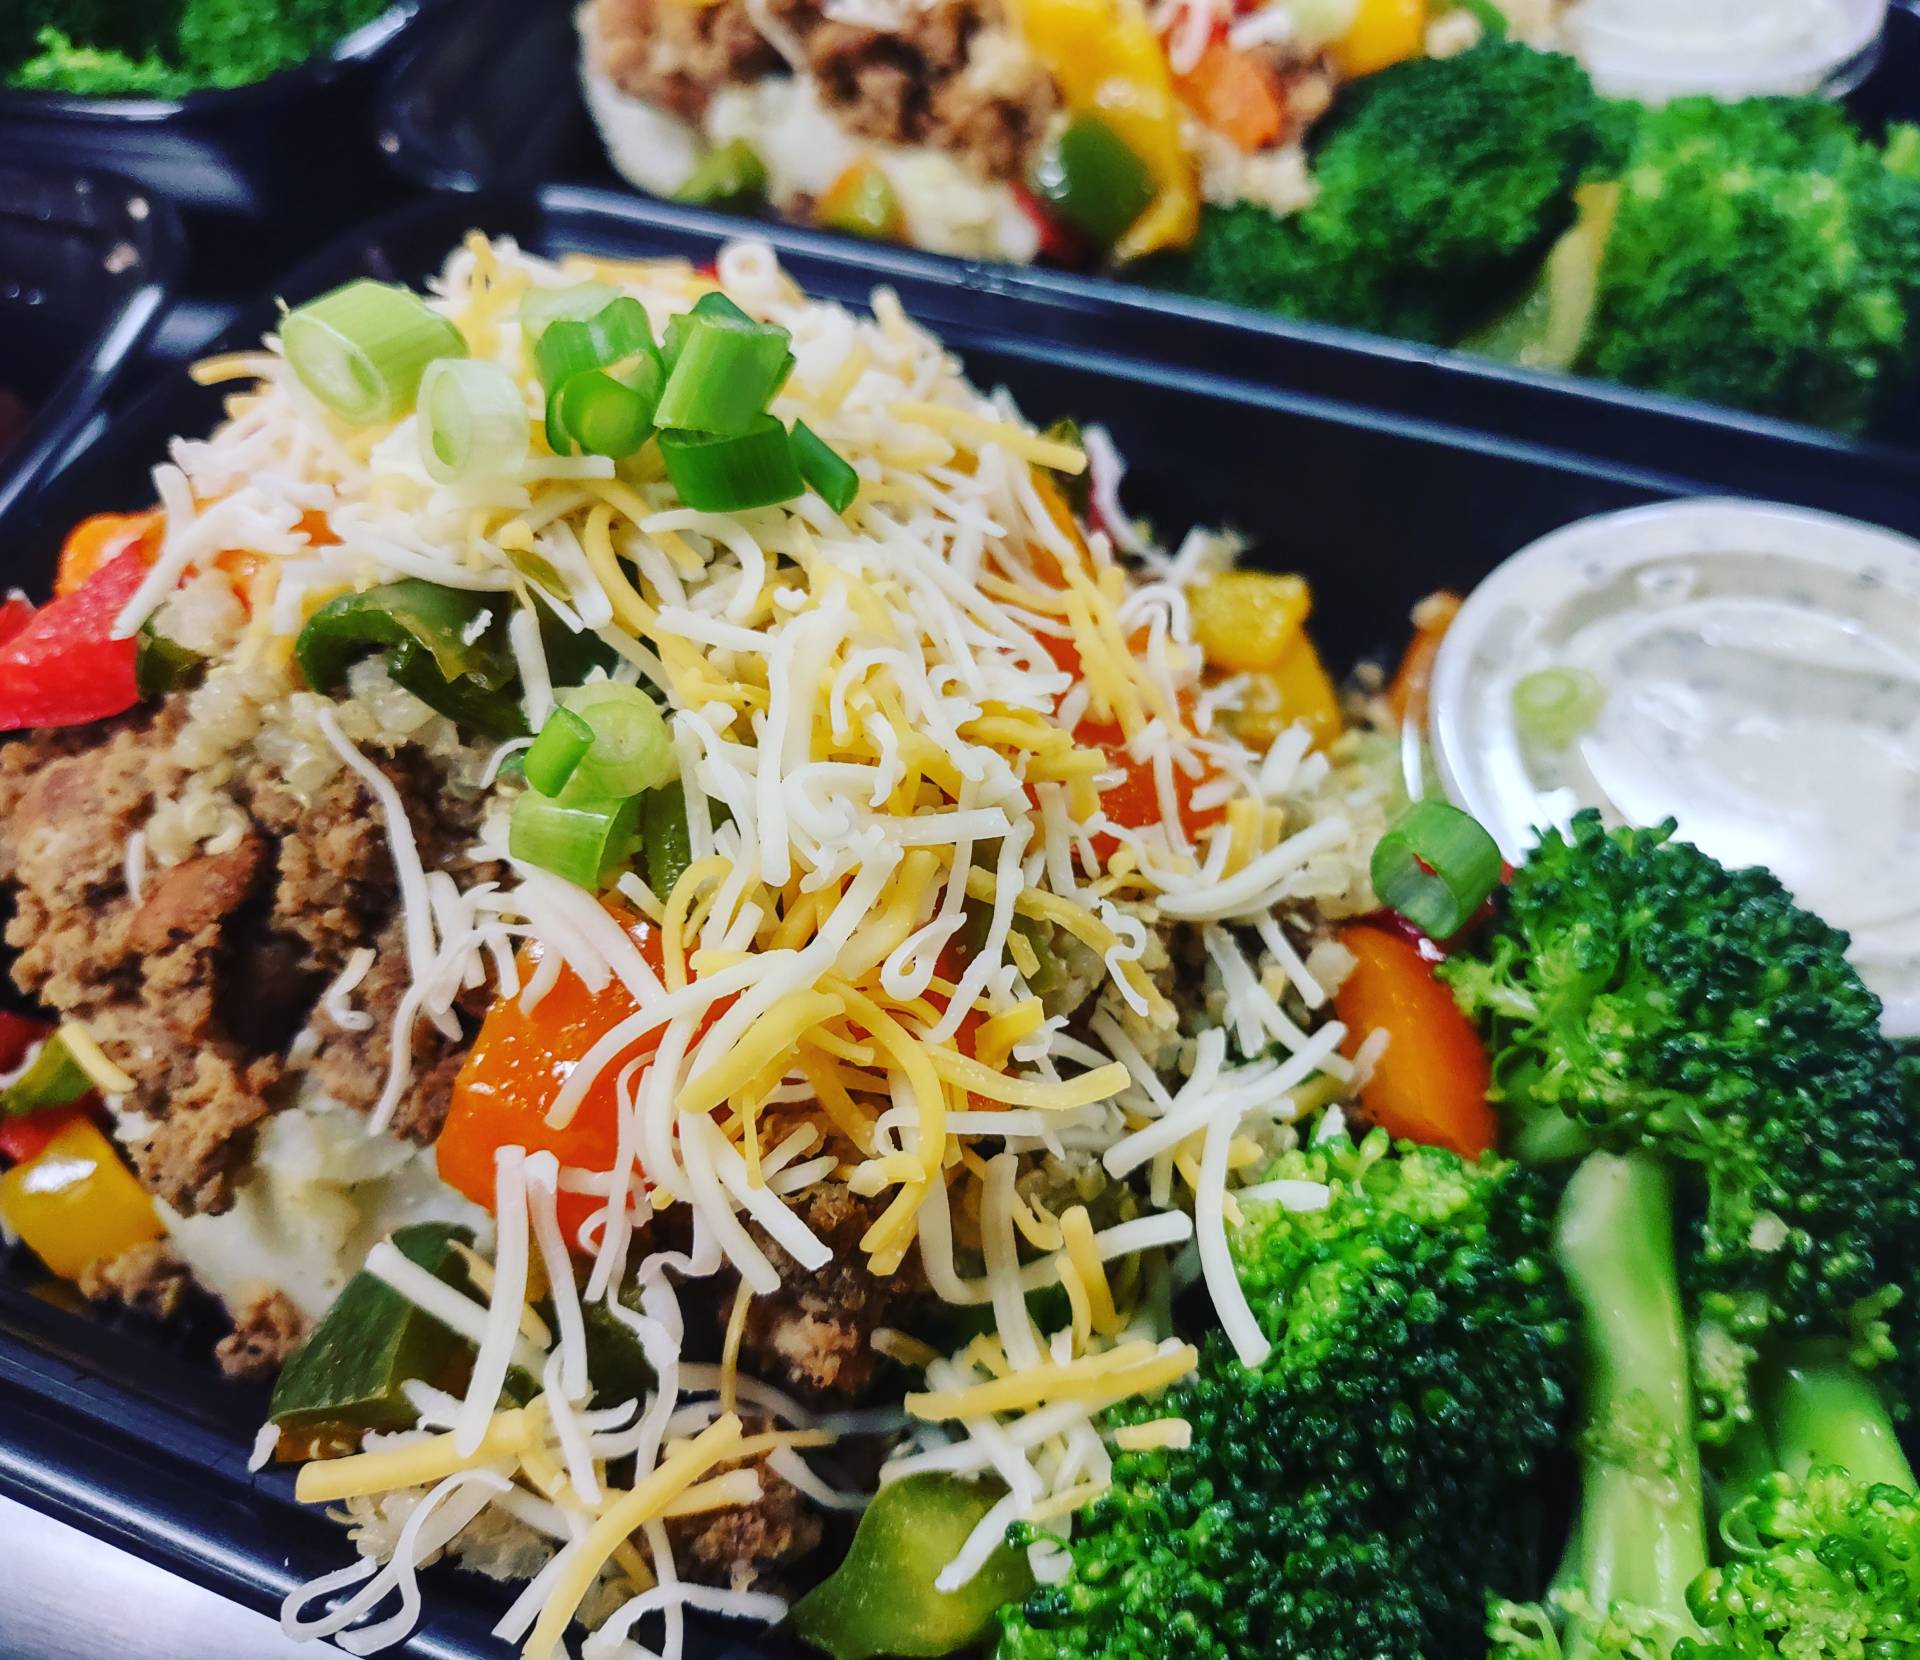 HEALTHY PORTION-Baked Potato w/Seasoned Grass-fed Beef, Roasted Peppers, Blended Cheddar & Green Onions...Fresh Garlic Broccoli..